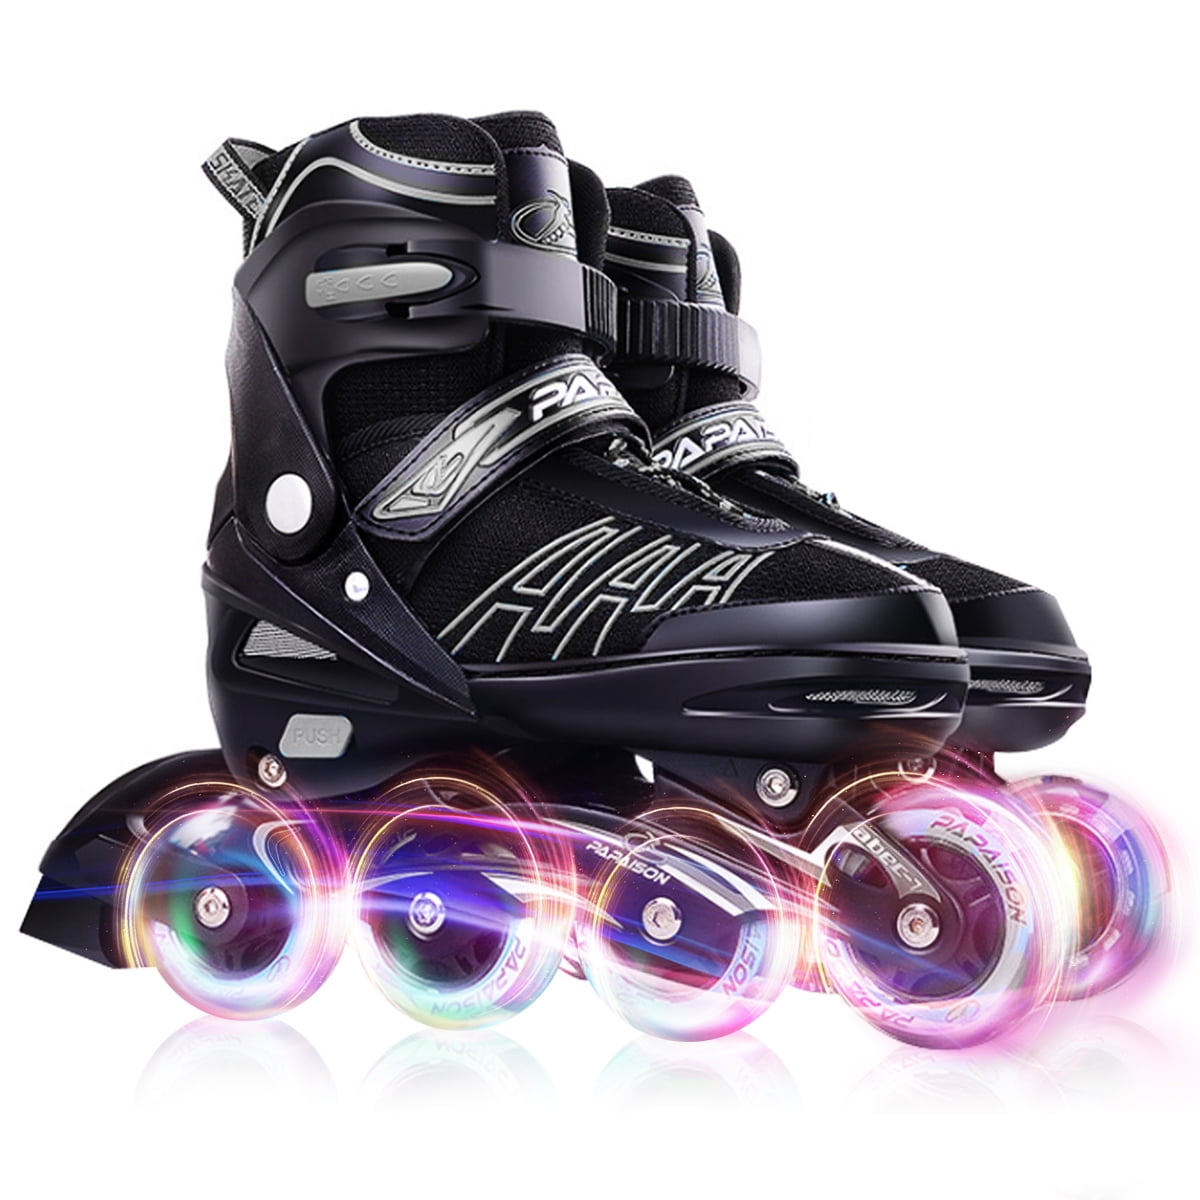 Roller Skates with Featuring All Illuminating Wheels Men and Ladies ITurnGlow Adjustable Inline Skates for Kids and Adults for Girls and Boys 